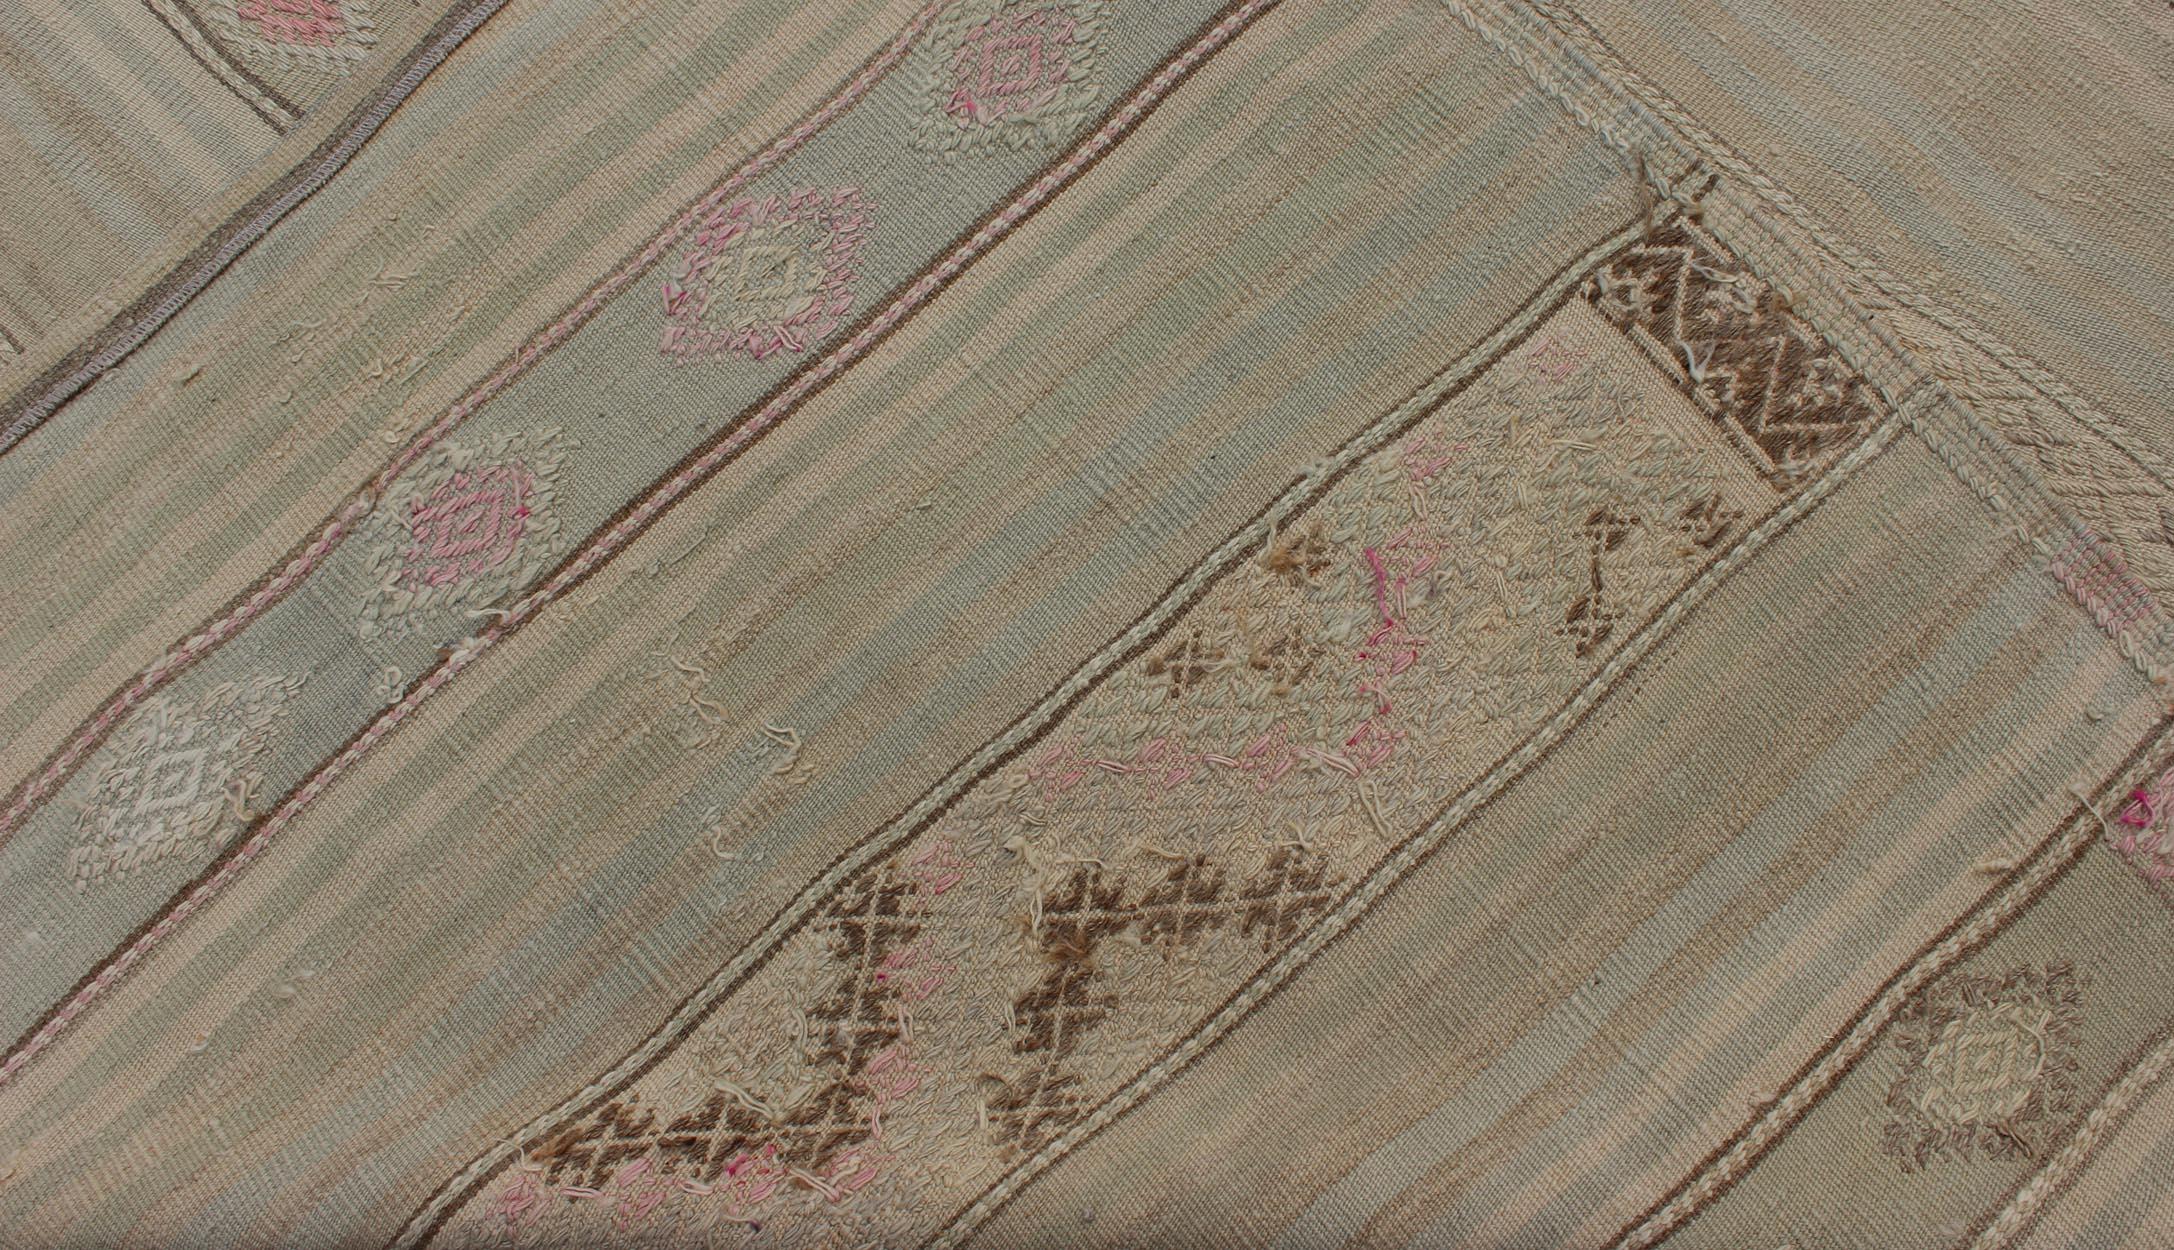 Vintage Turkish Flat-Weave Striped Kilim in Taupe, Pink, and Light Brown For Sale 7